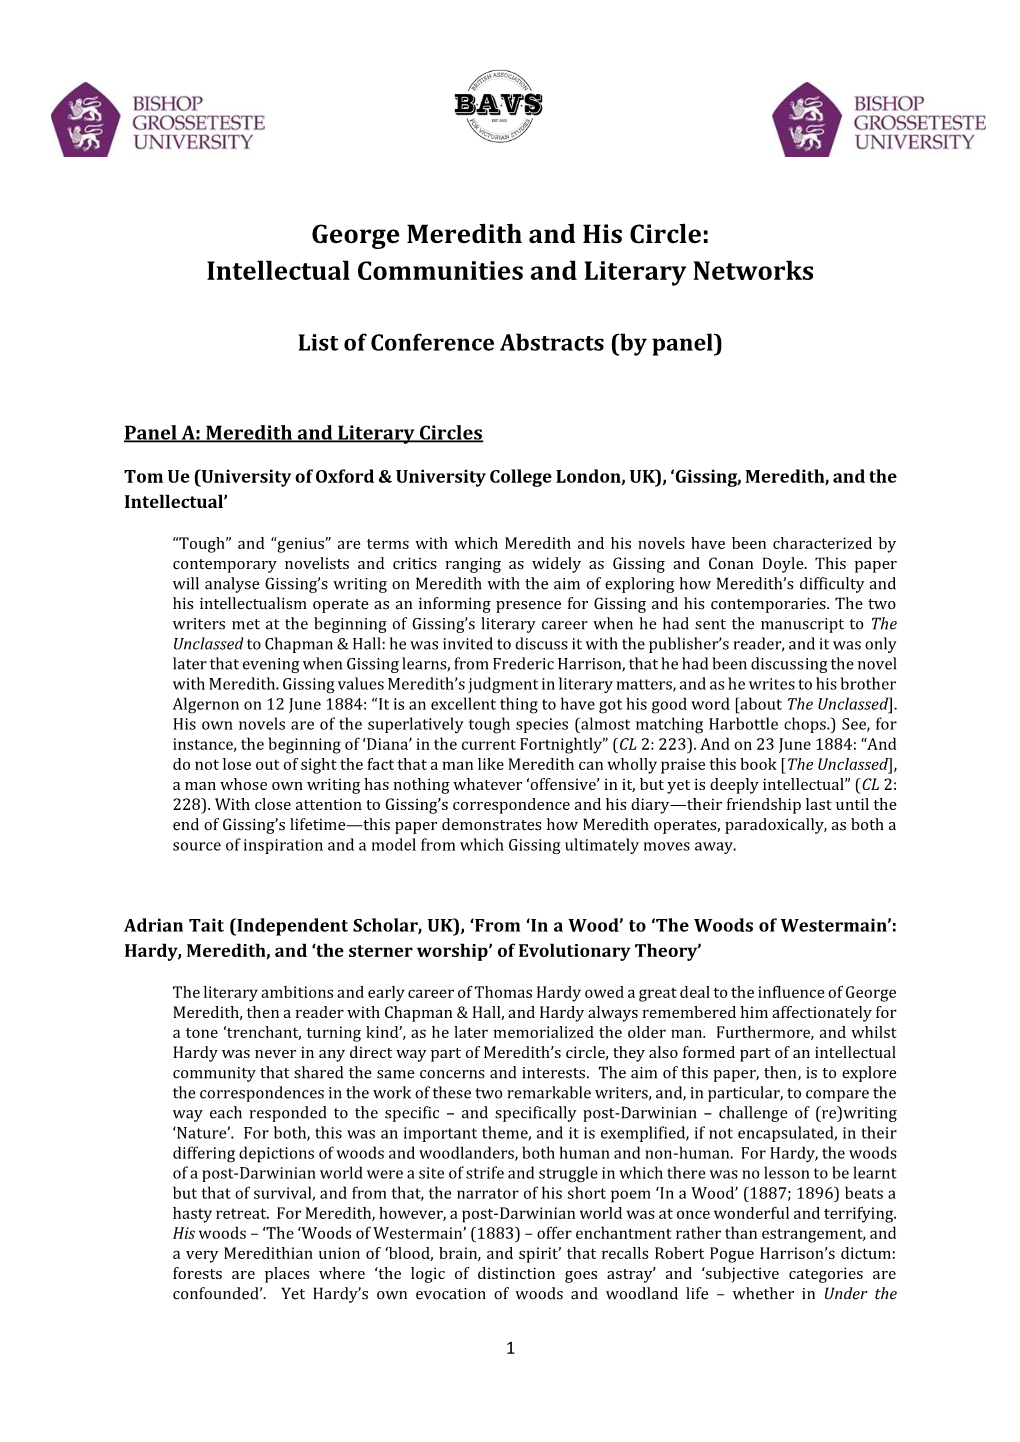 George Meredith and His Circle: Intellectual Communities and Literary Networks